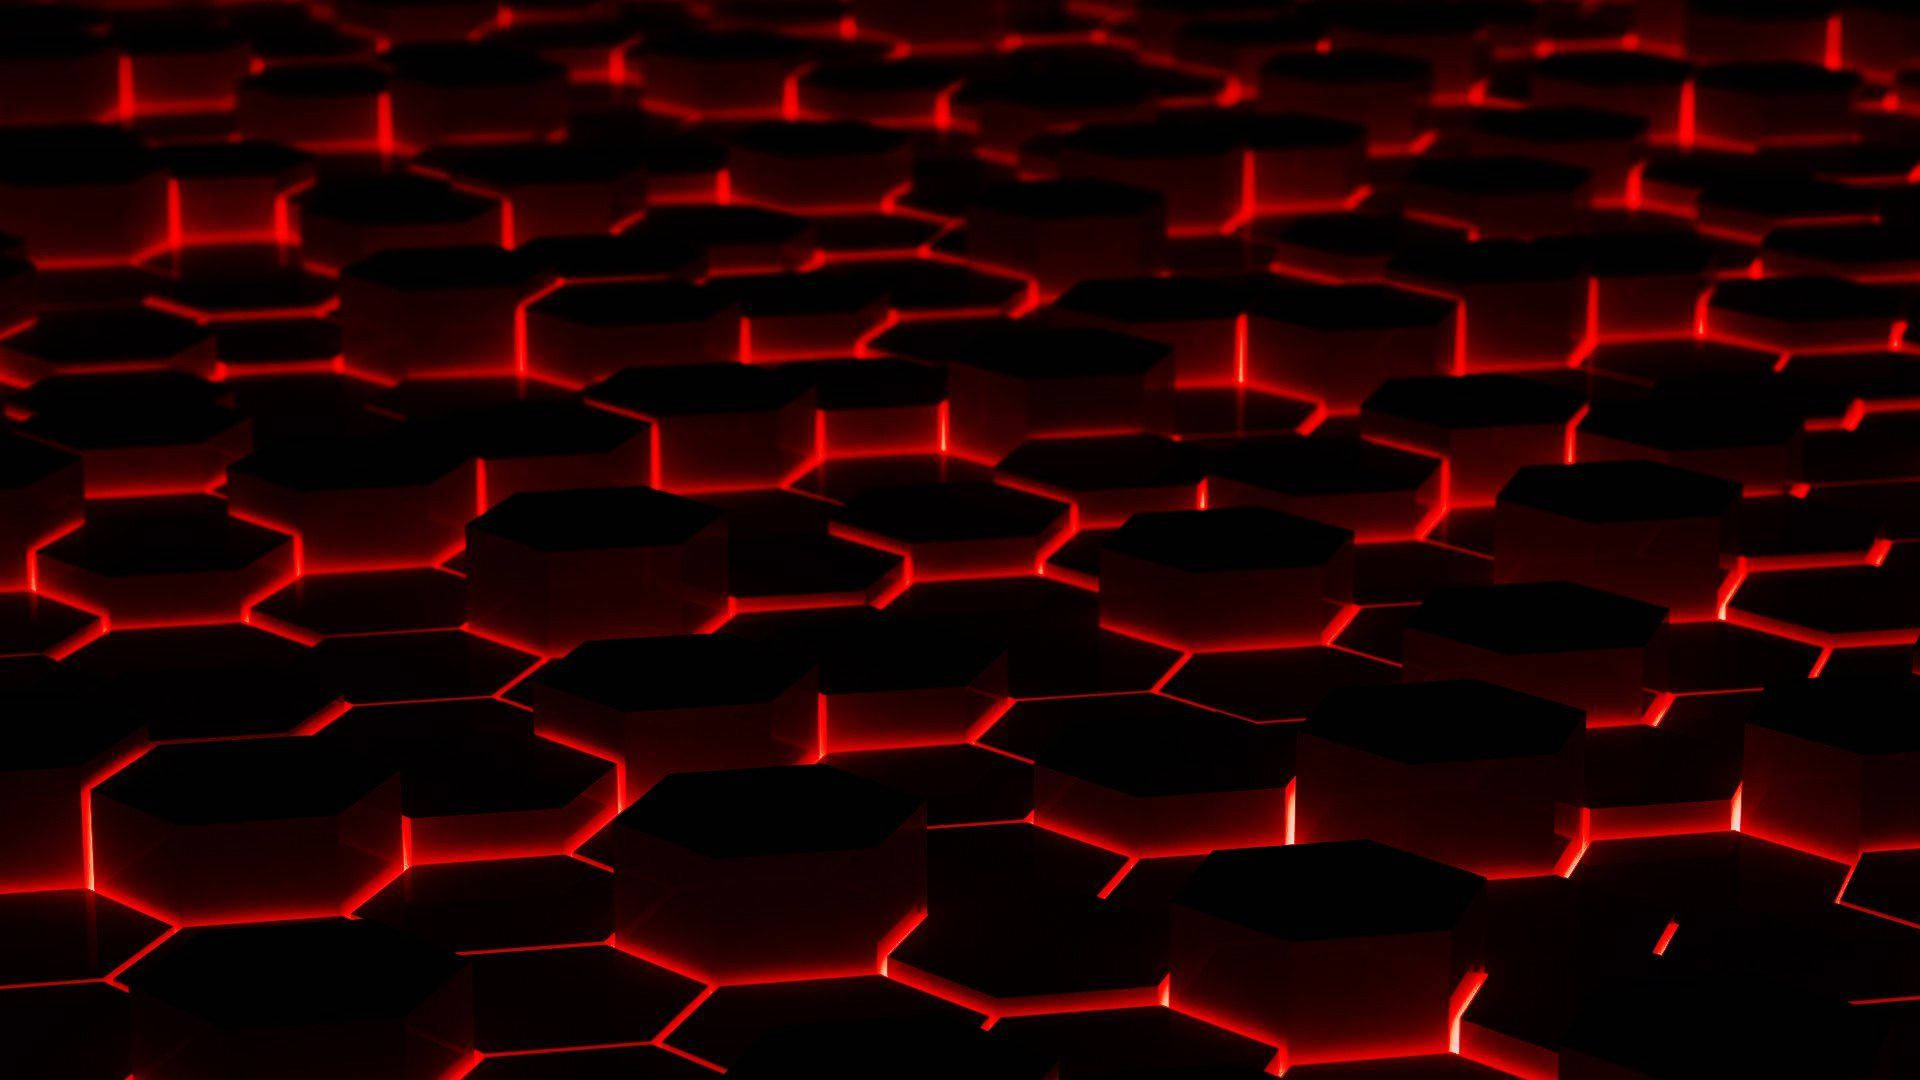 Red And Black 1920X1080 wallpaper